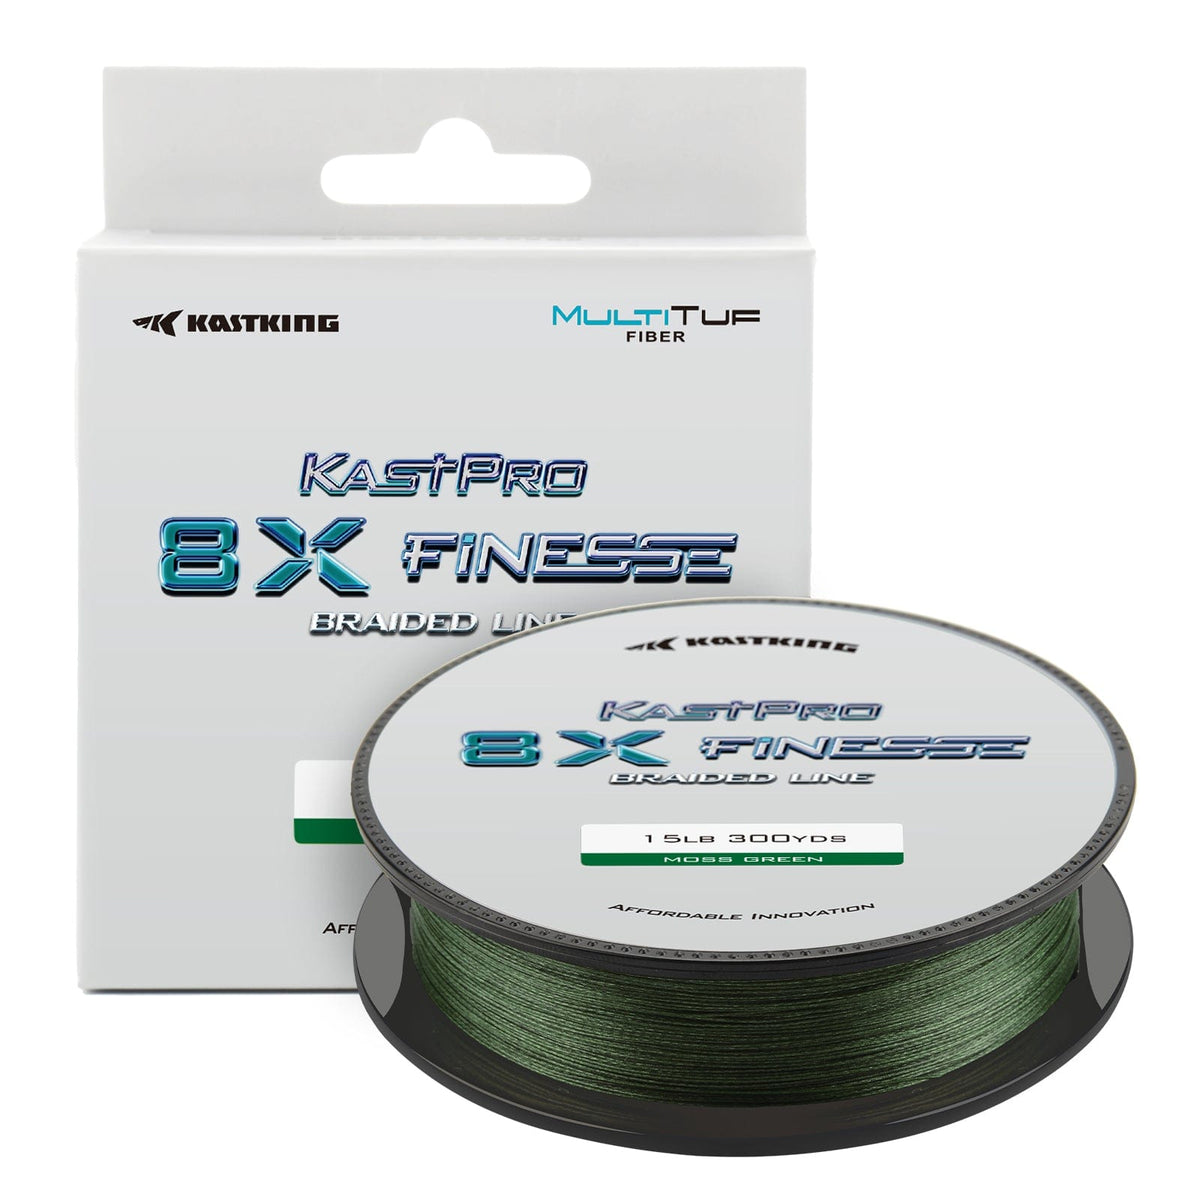 Long Casting Line for Spinning and Finesse Casting Presentations Superior Knot Strength and Abrasion Resistant Extremely Thin KastKing KastPro X Finesse Braid Fishing Line Smooth Sensitive Braid 